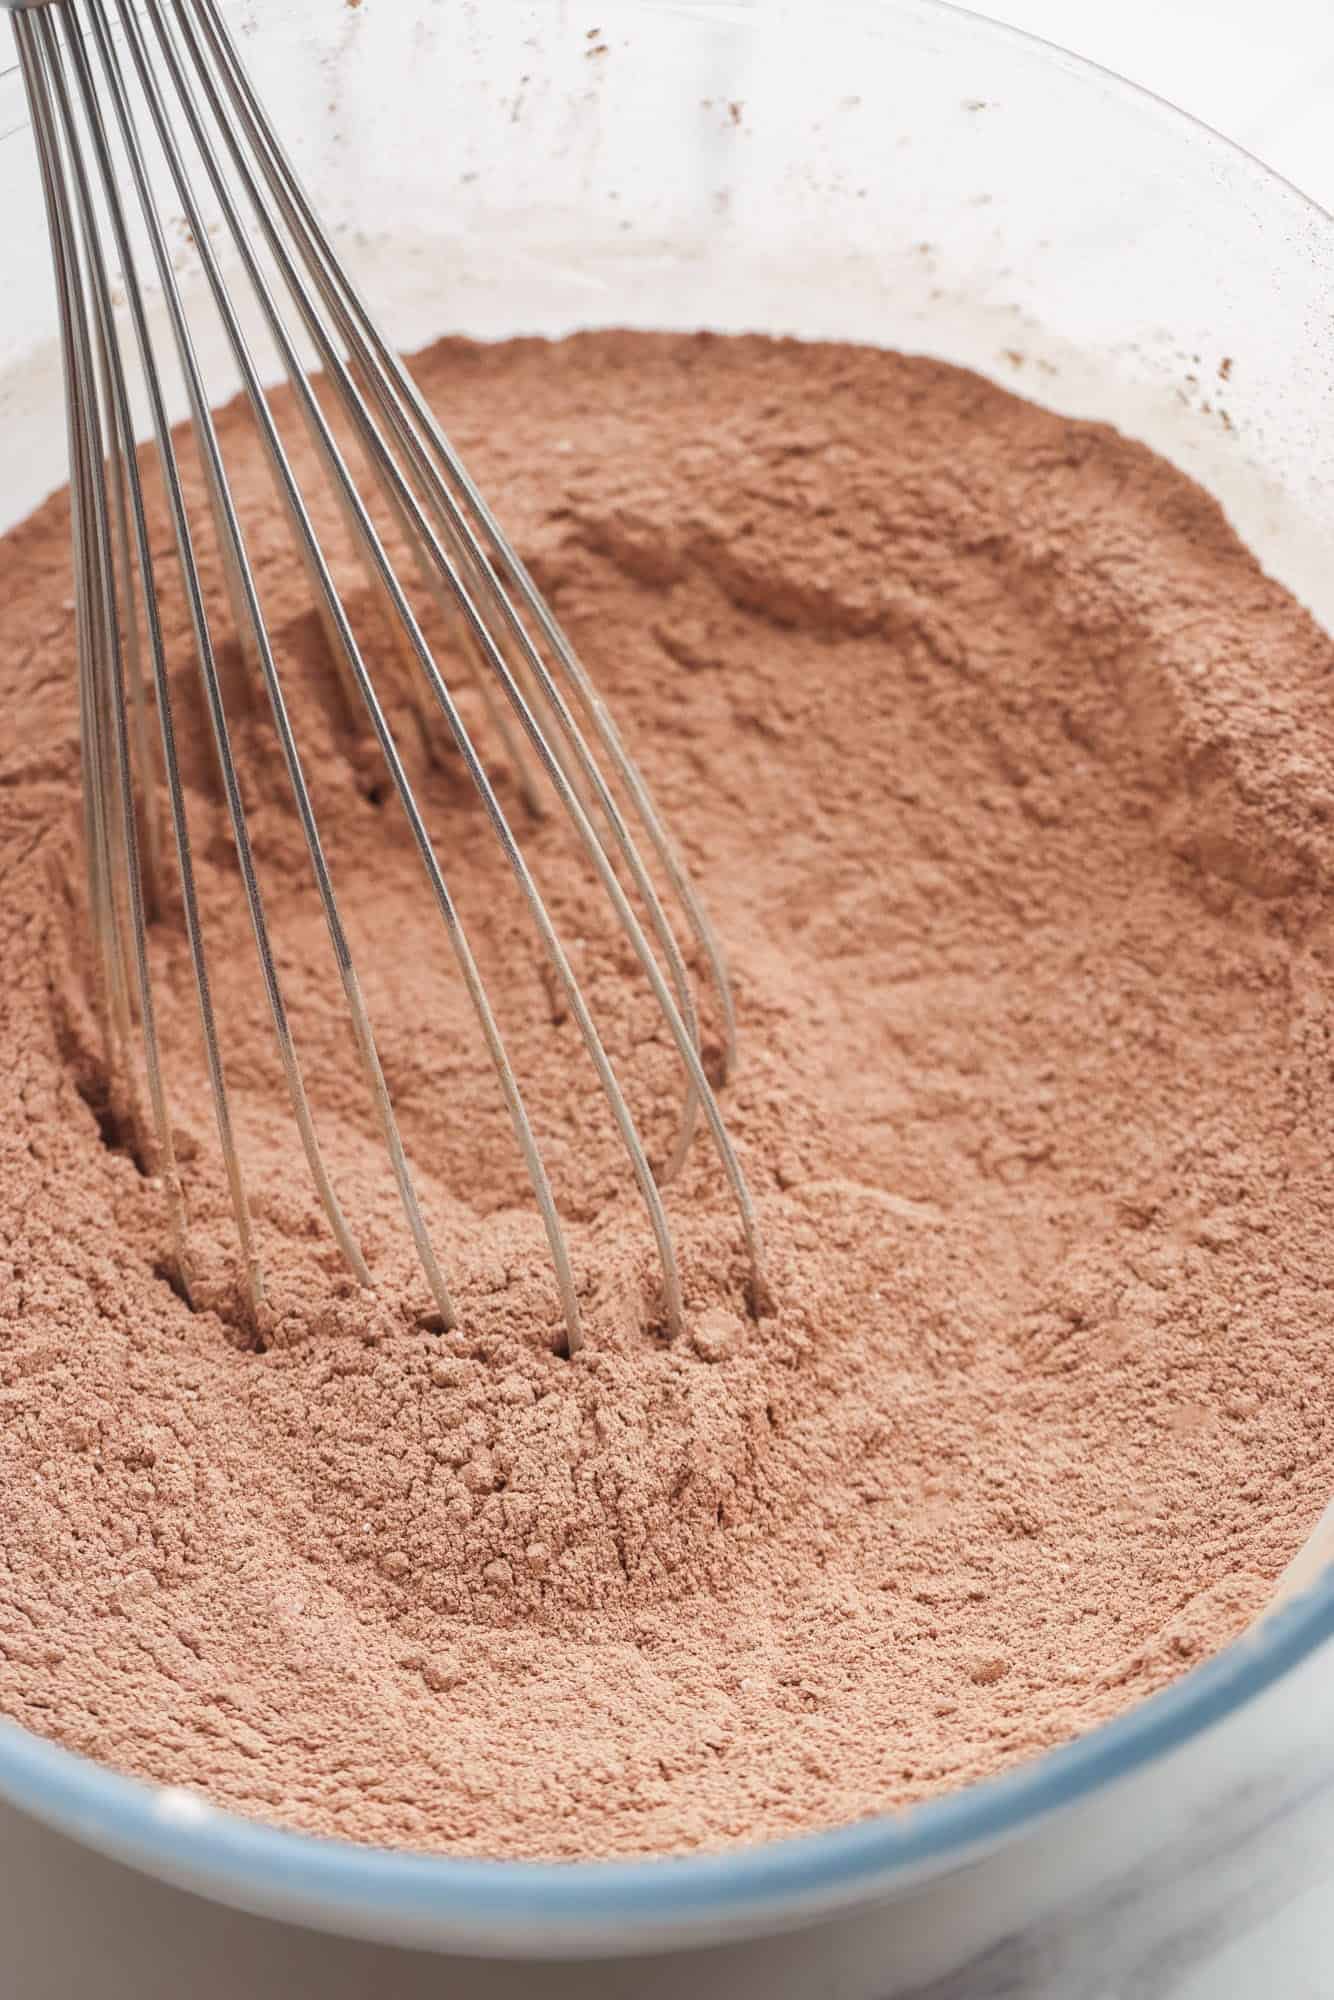 a whisk mixing hot chocolate powder in a bowl